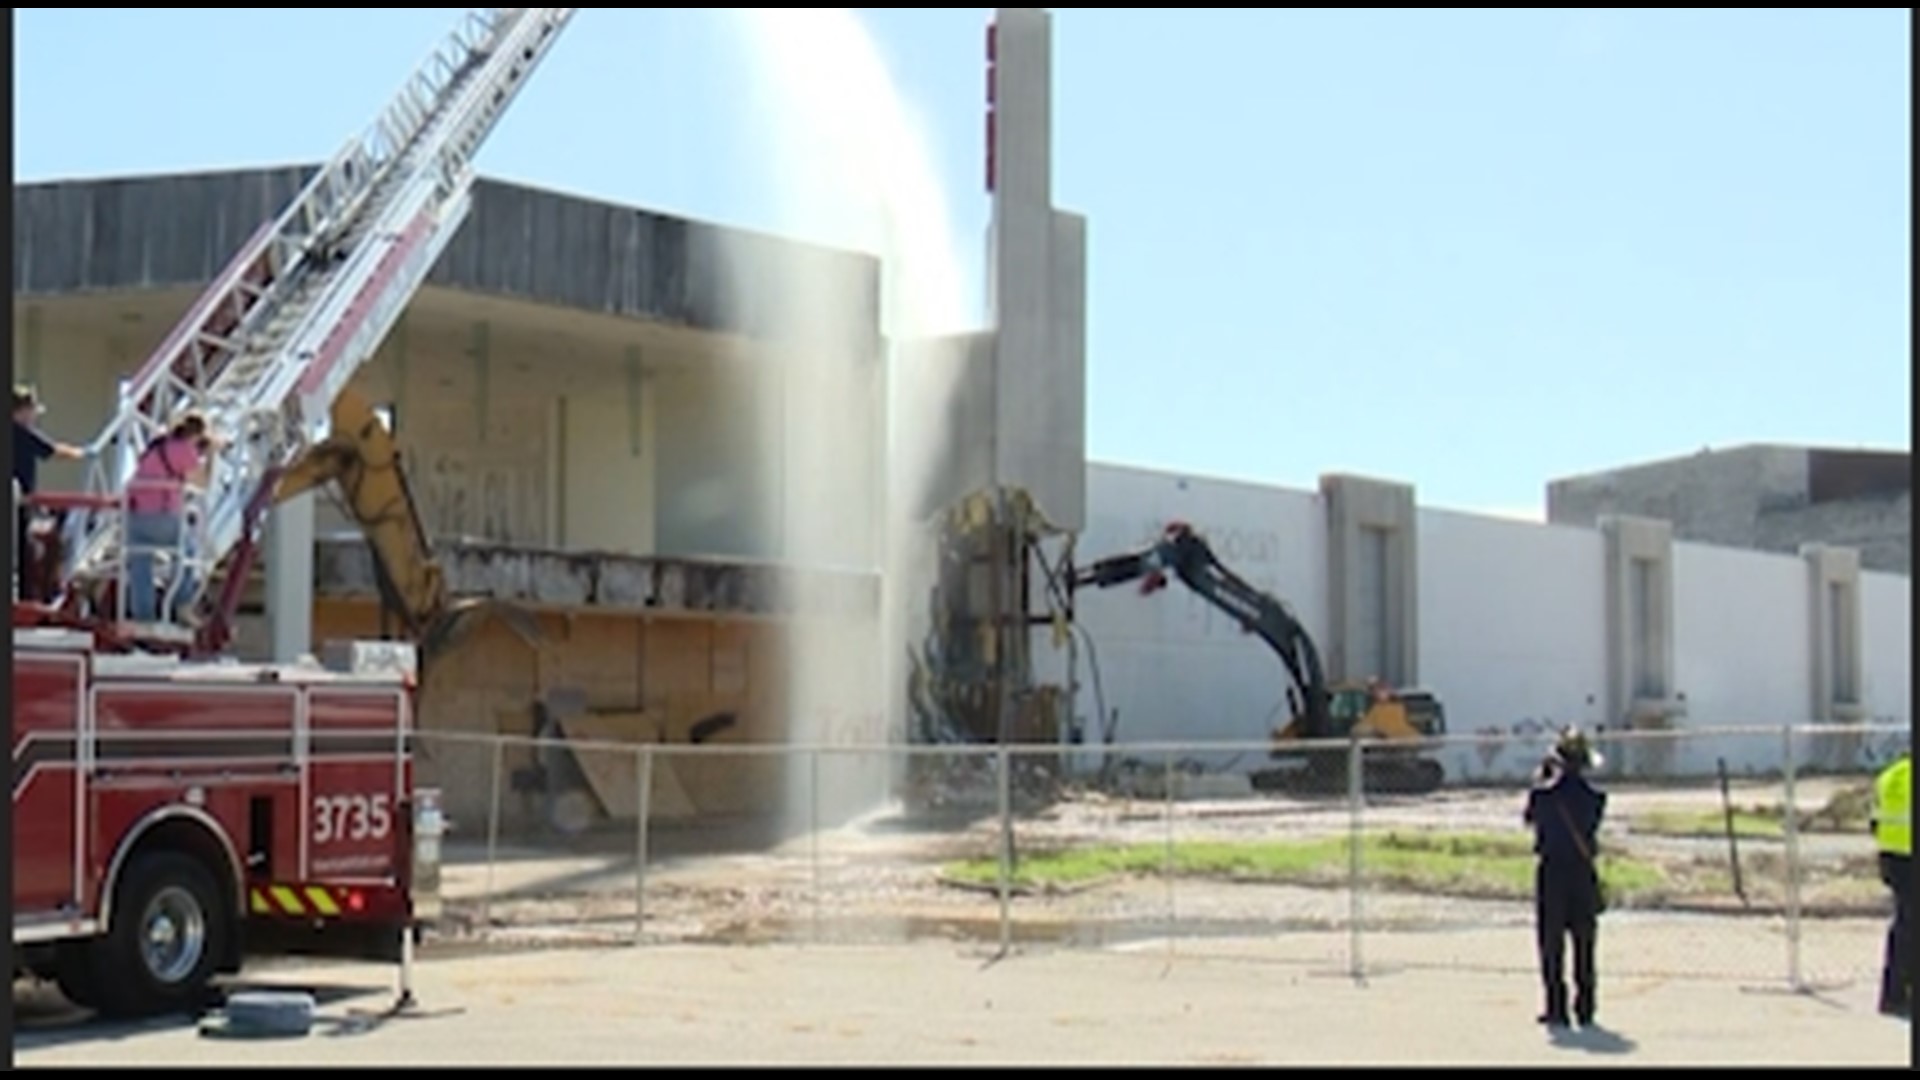 The north St. Louis County shopping center is being torn down nearly 50 years to the day it opened in 1973. The tear-down began at 10 a.m. Tuesday.